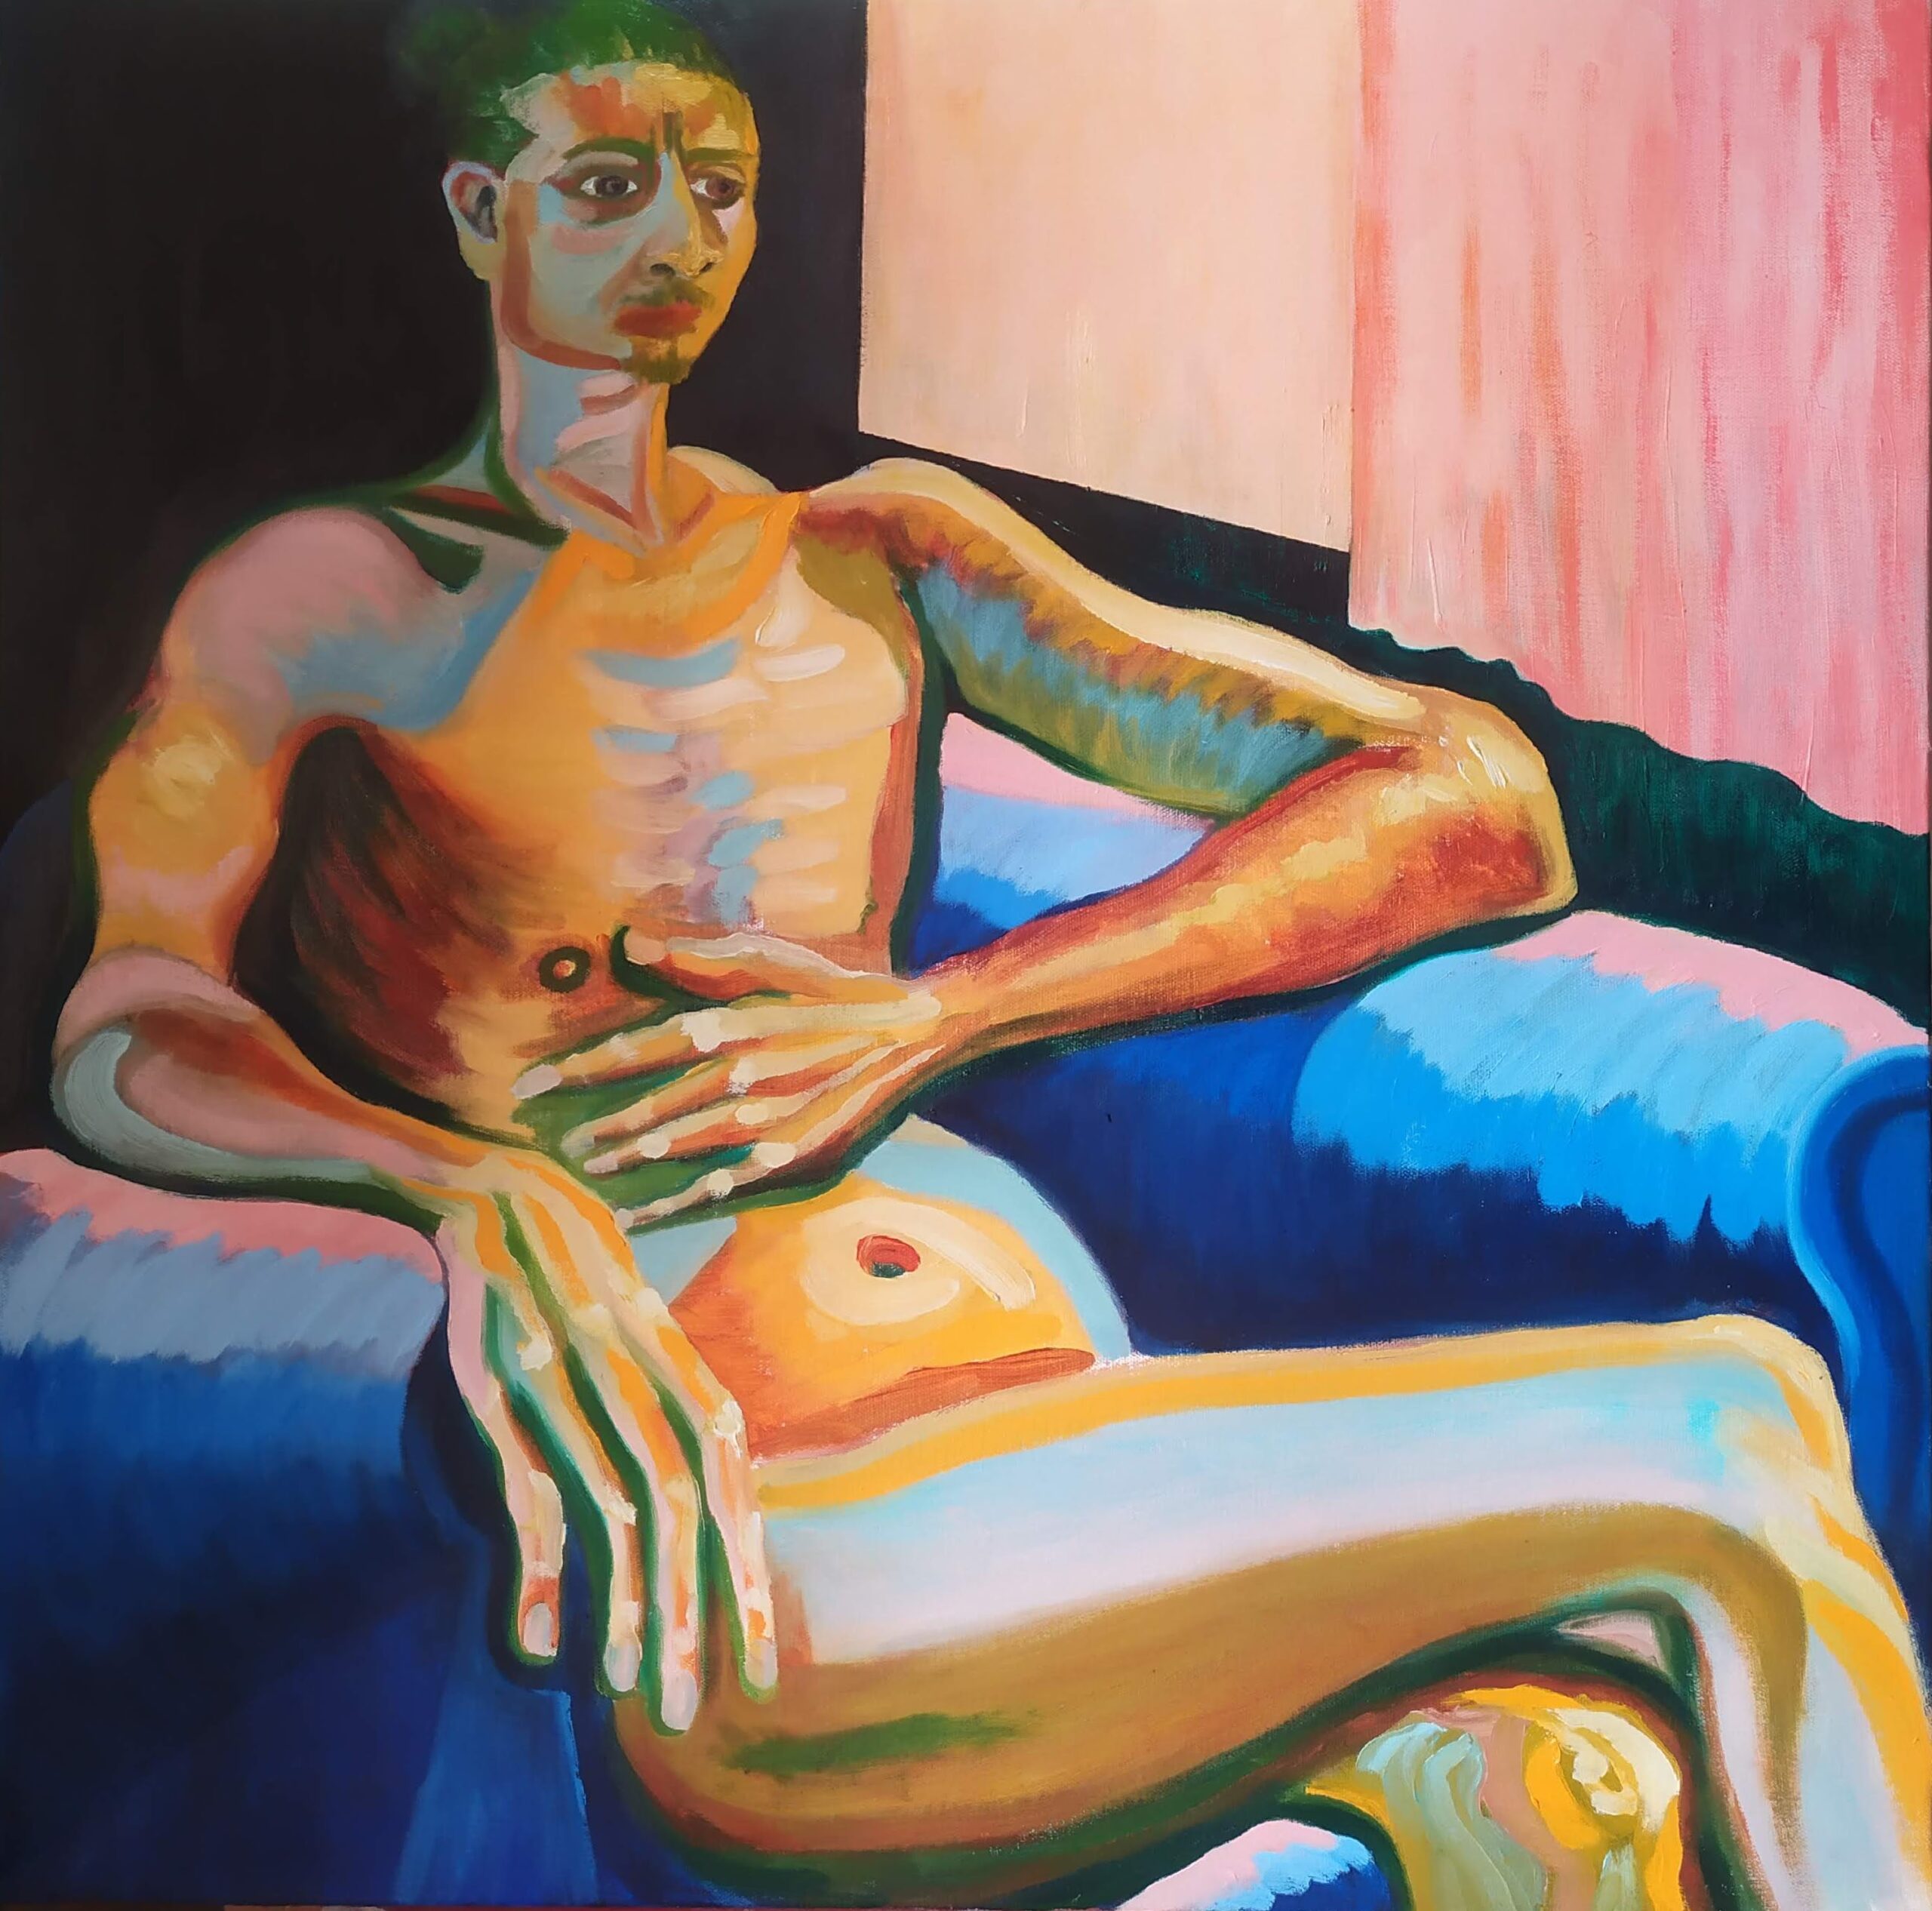 A square oil painting of a naked man seated in an armchair next to a window, painted in an expressionist manner in a palette of oranges, pale and deep blues, greens and pinks